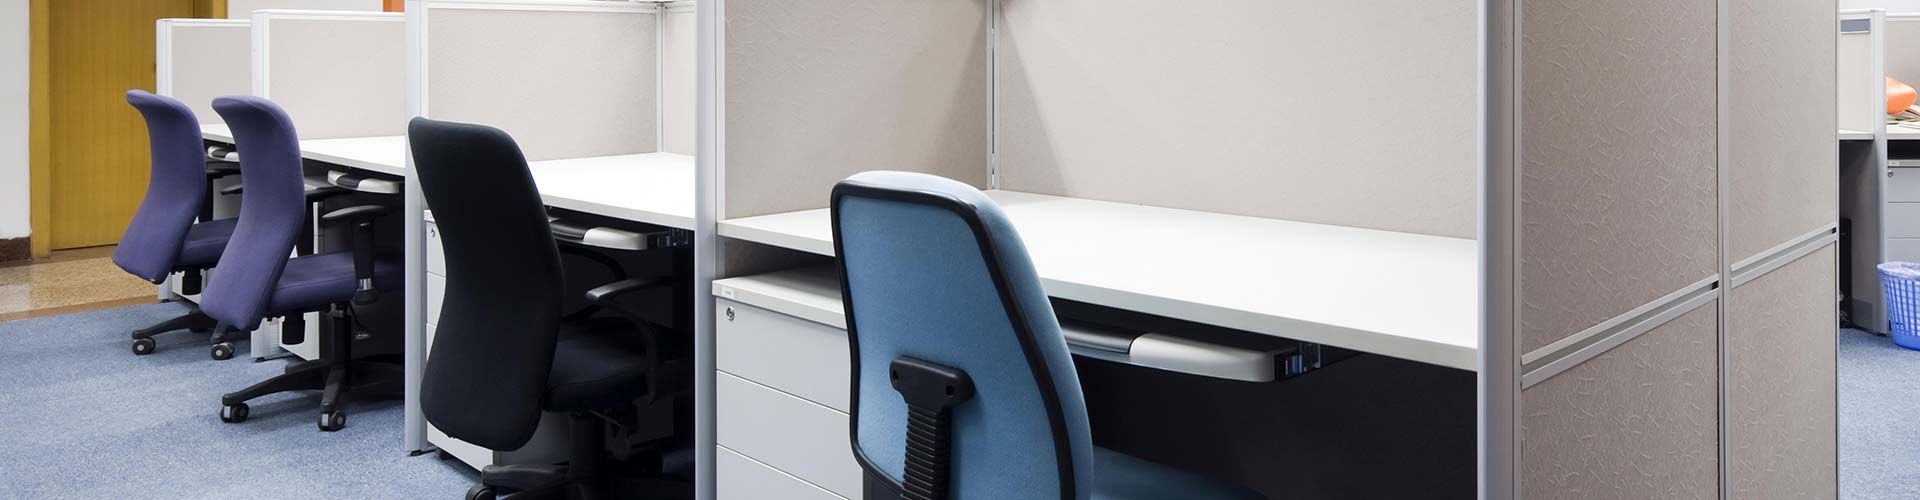 A blue chair in an office maintained by ELEET